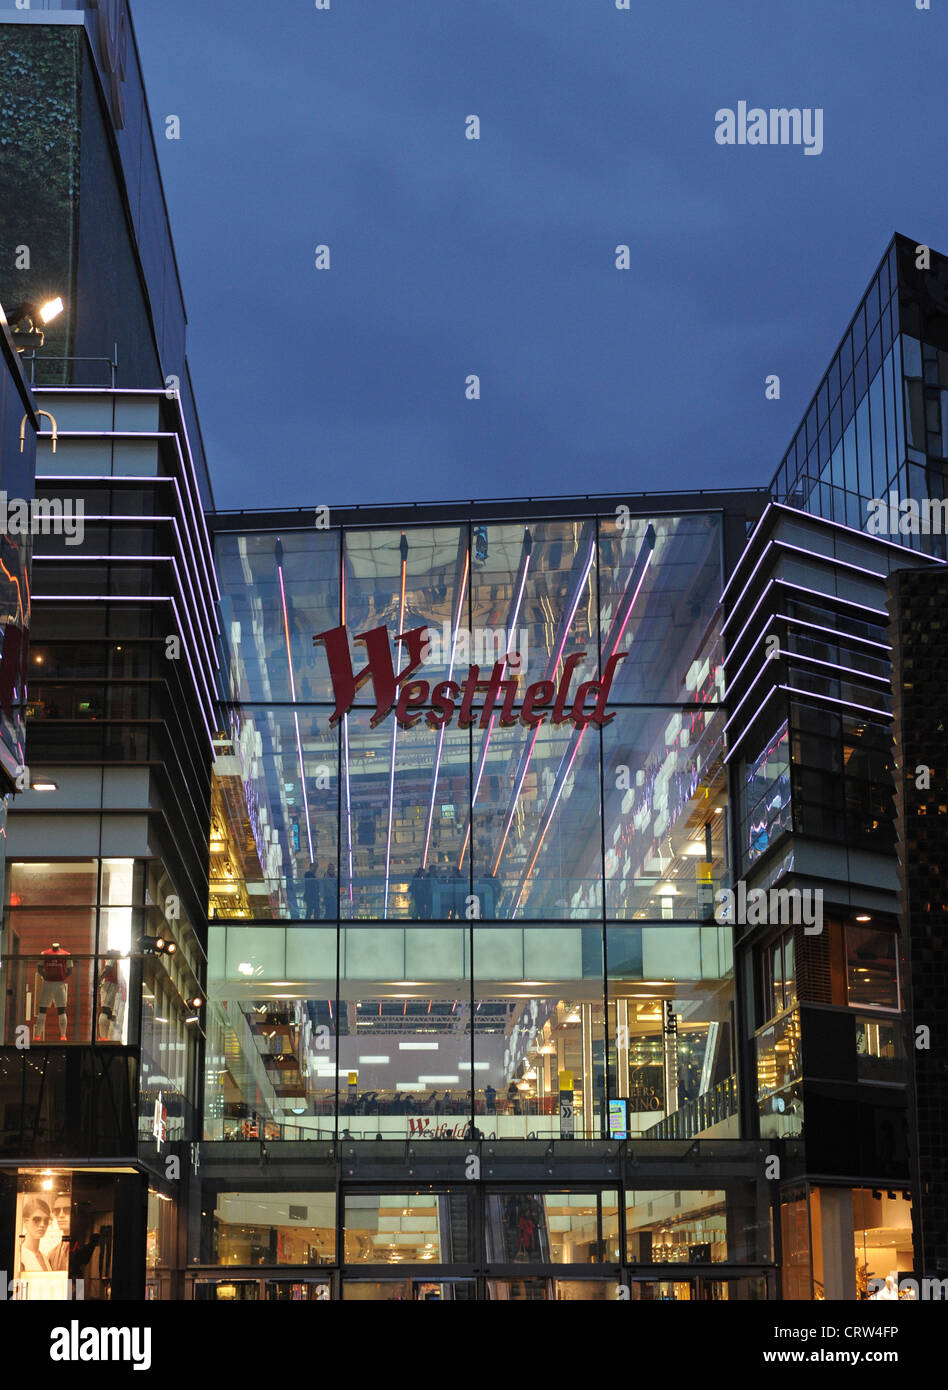 Westfield in West London editorial stock photo. Image of mall - 38702298